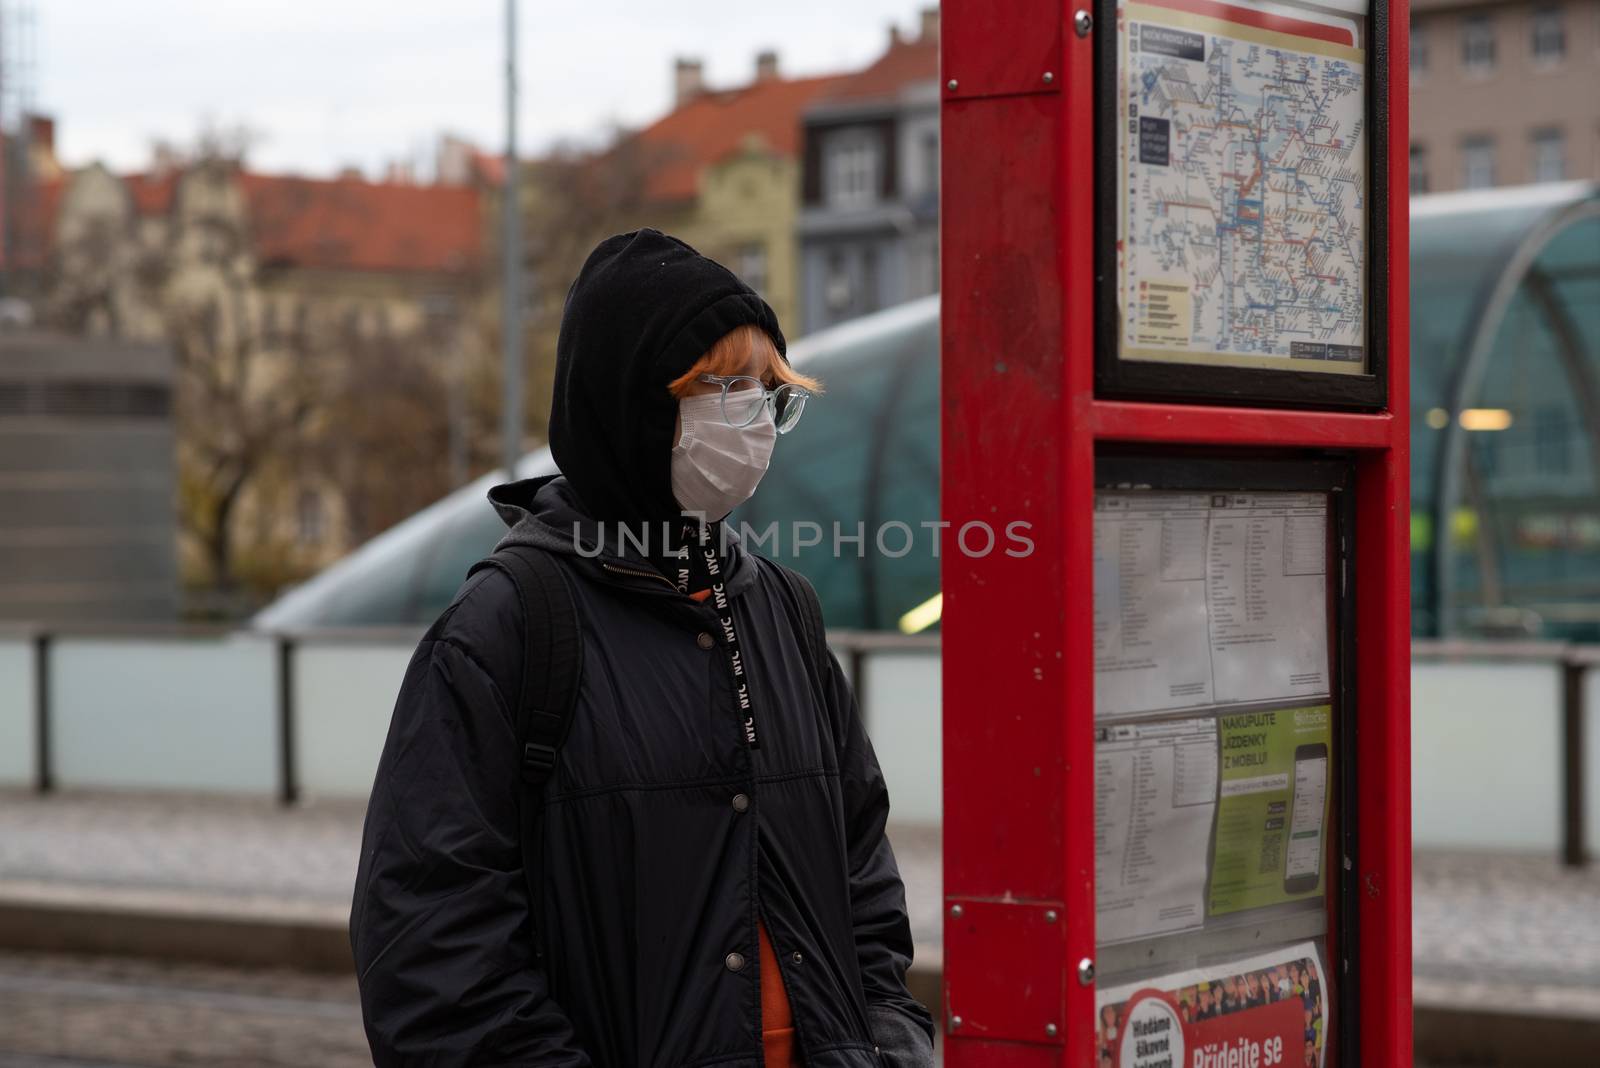 People on a winter day facing quarantine. Man, woman, mums, child, old and young people outdoors. Prague 6 by gonzalobell